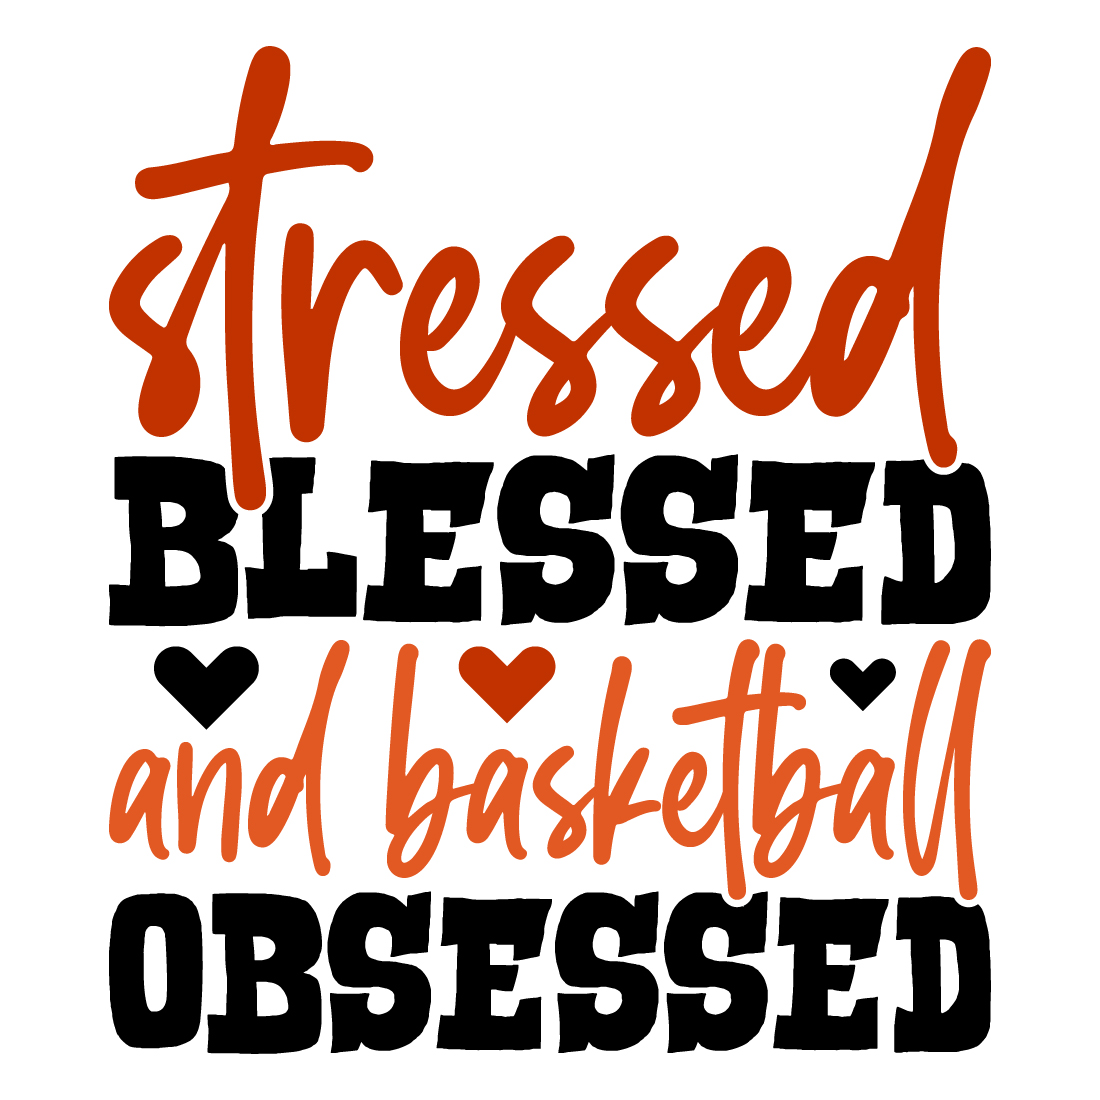 stressed blessed and basketball obsessed 2 35